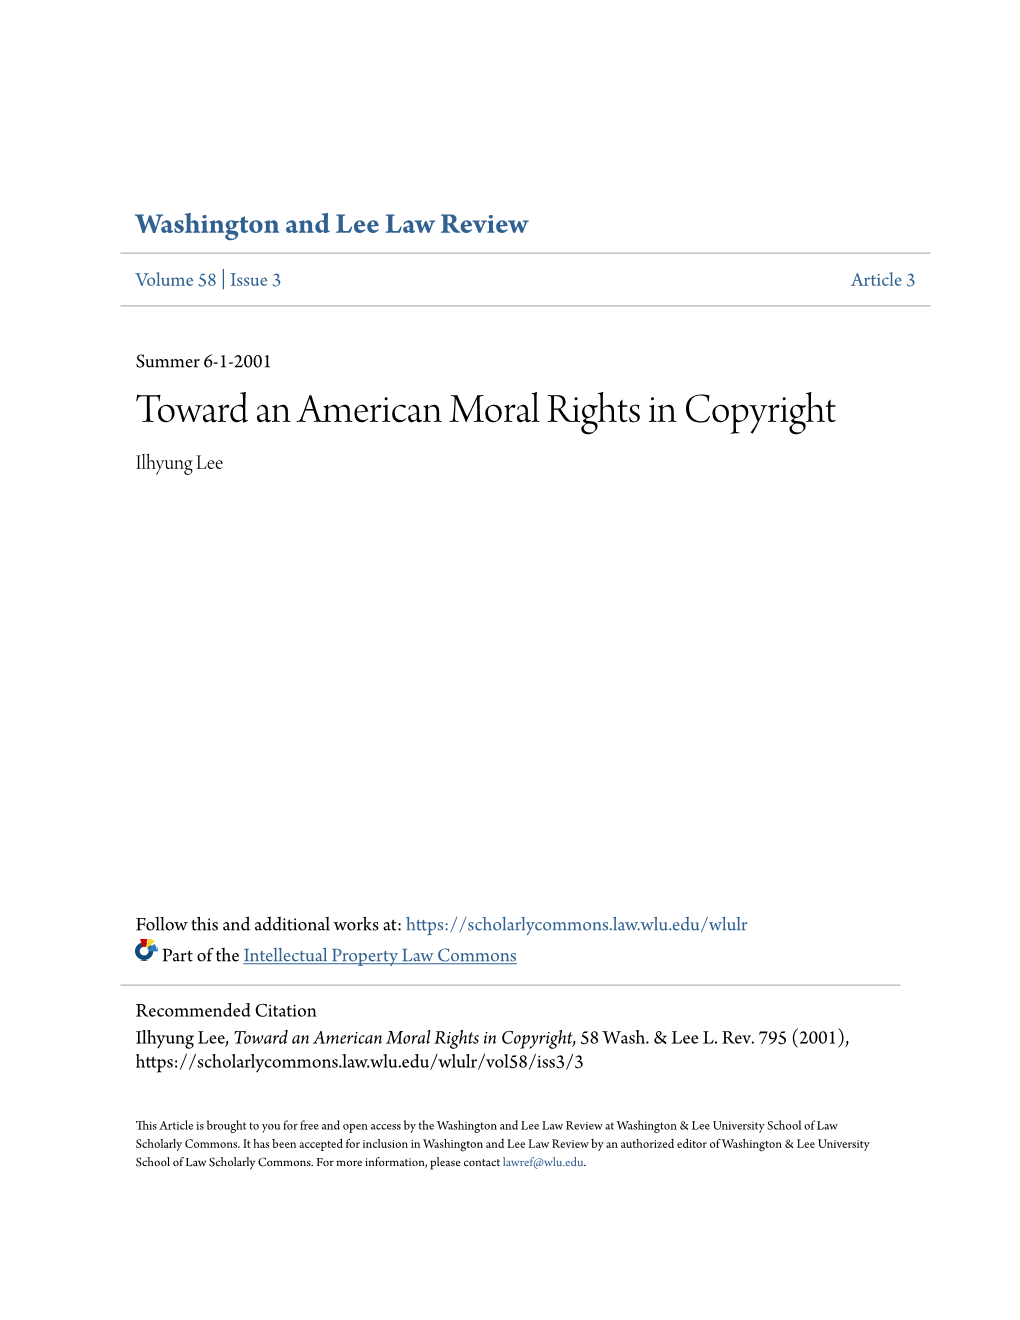 Moral Rights in Copyright Ilhyung Lee